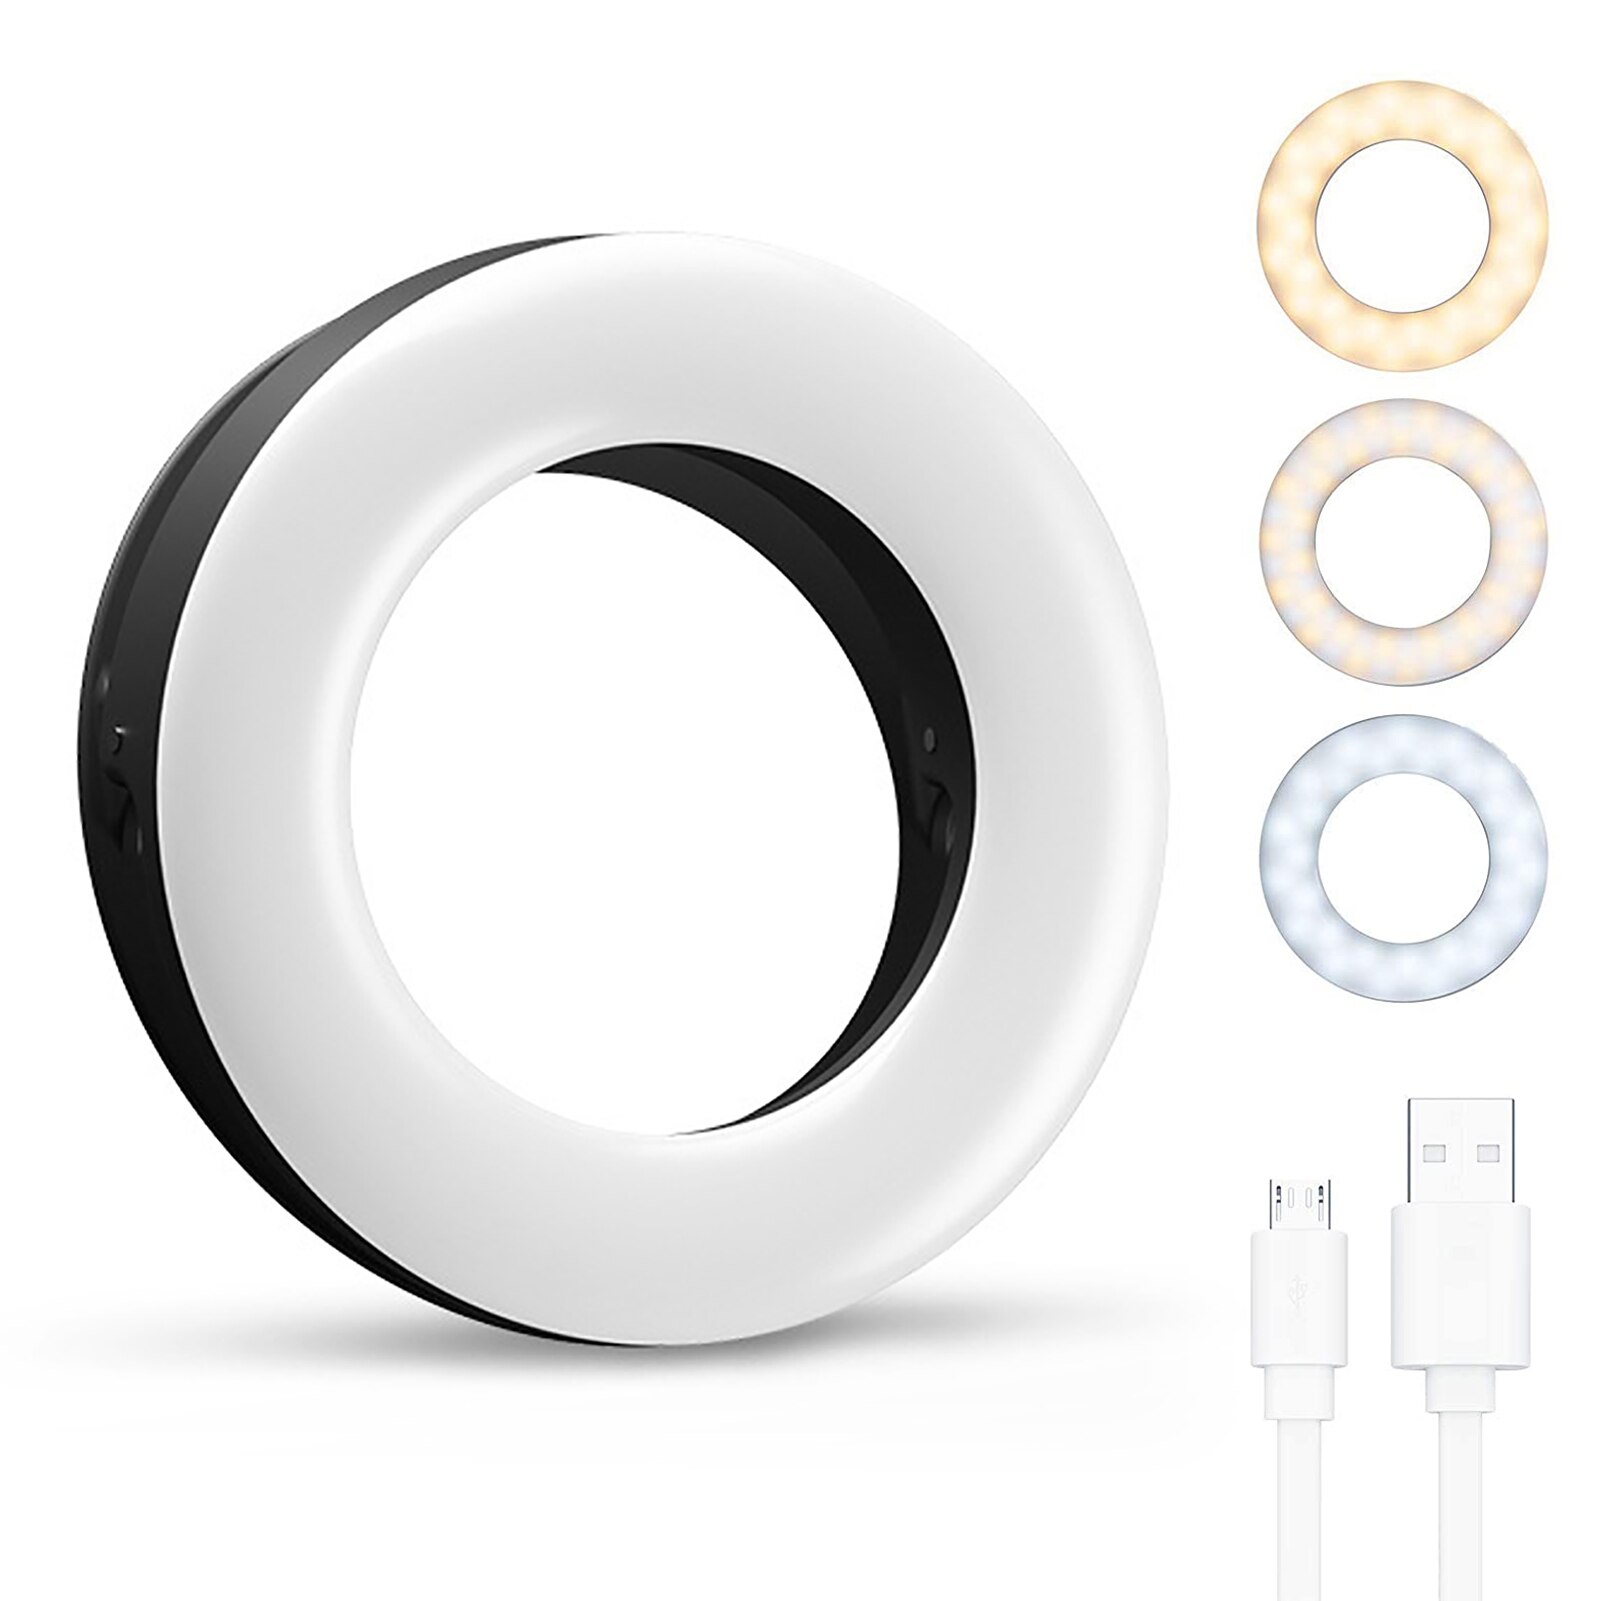 Selfie Light Ring Lights Led Circle Mini Light Clamp for Phones, Rechargeable Clip-on Makeup Fill Light Laptop Camera Video